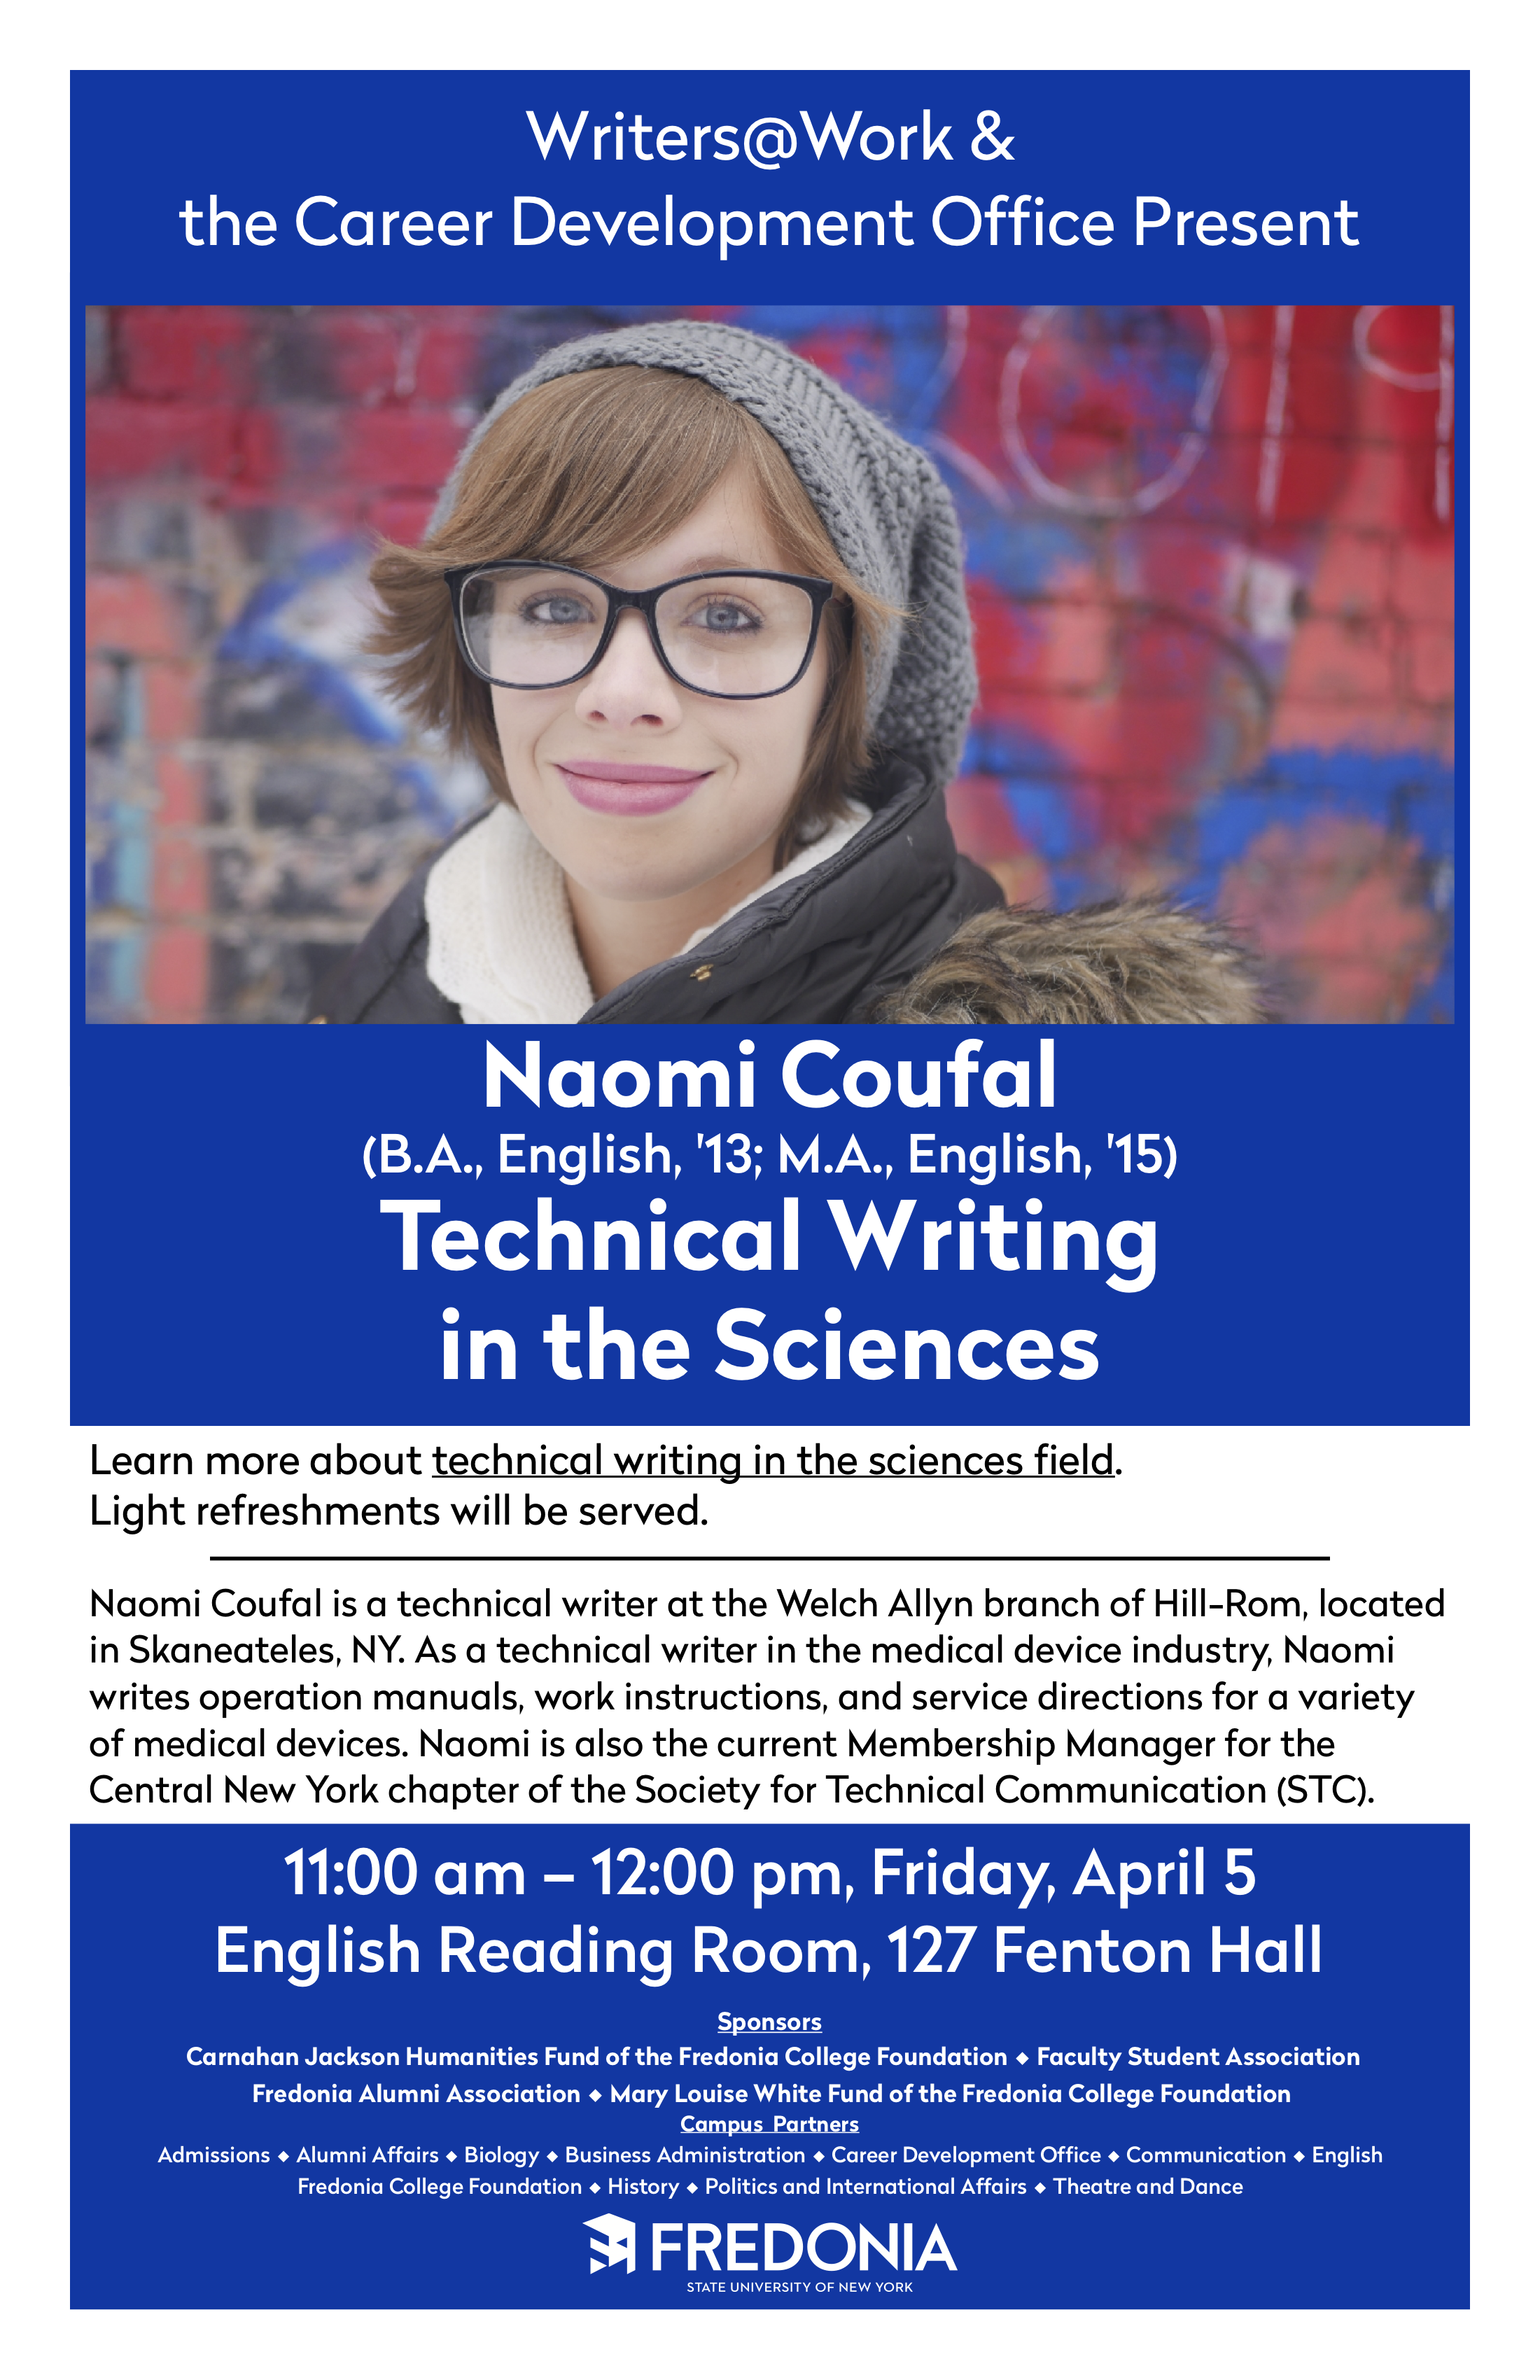 Naomi Coufal, Technical Writing in the Sciences, April 5, 2019